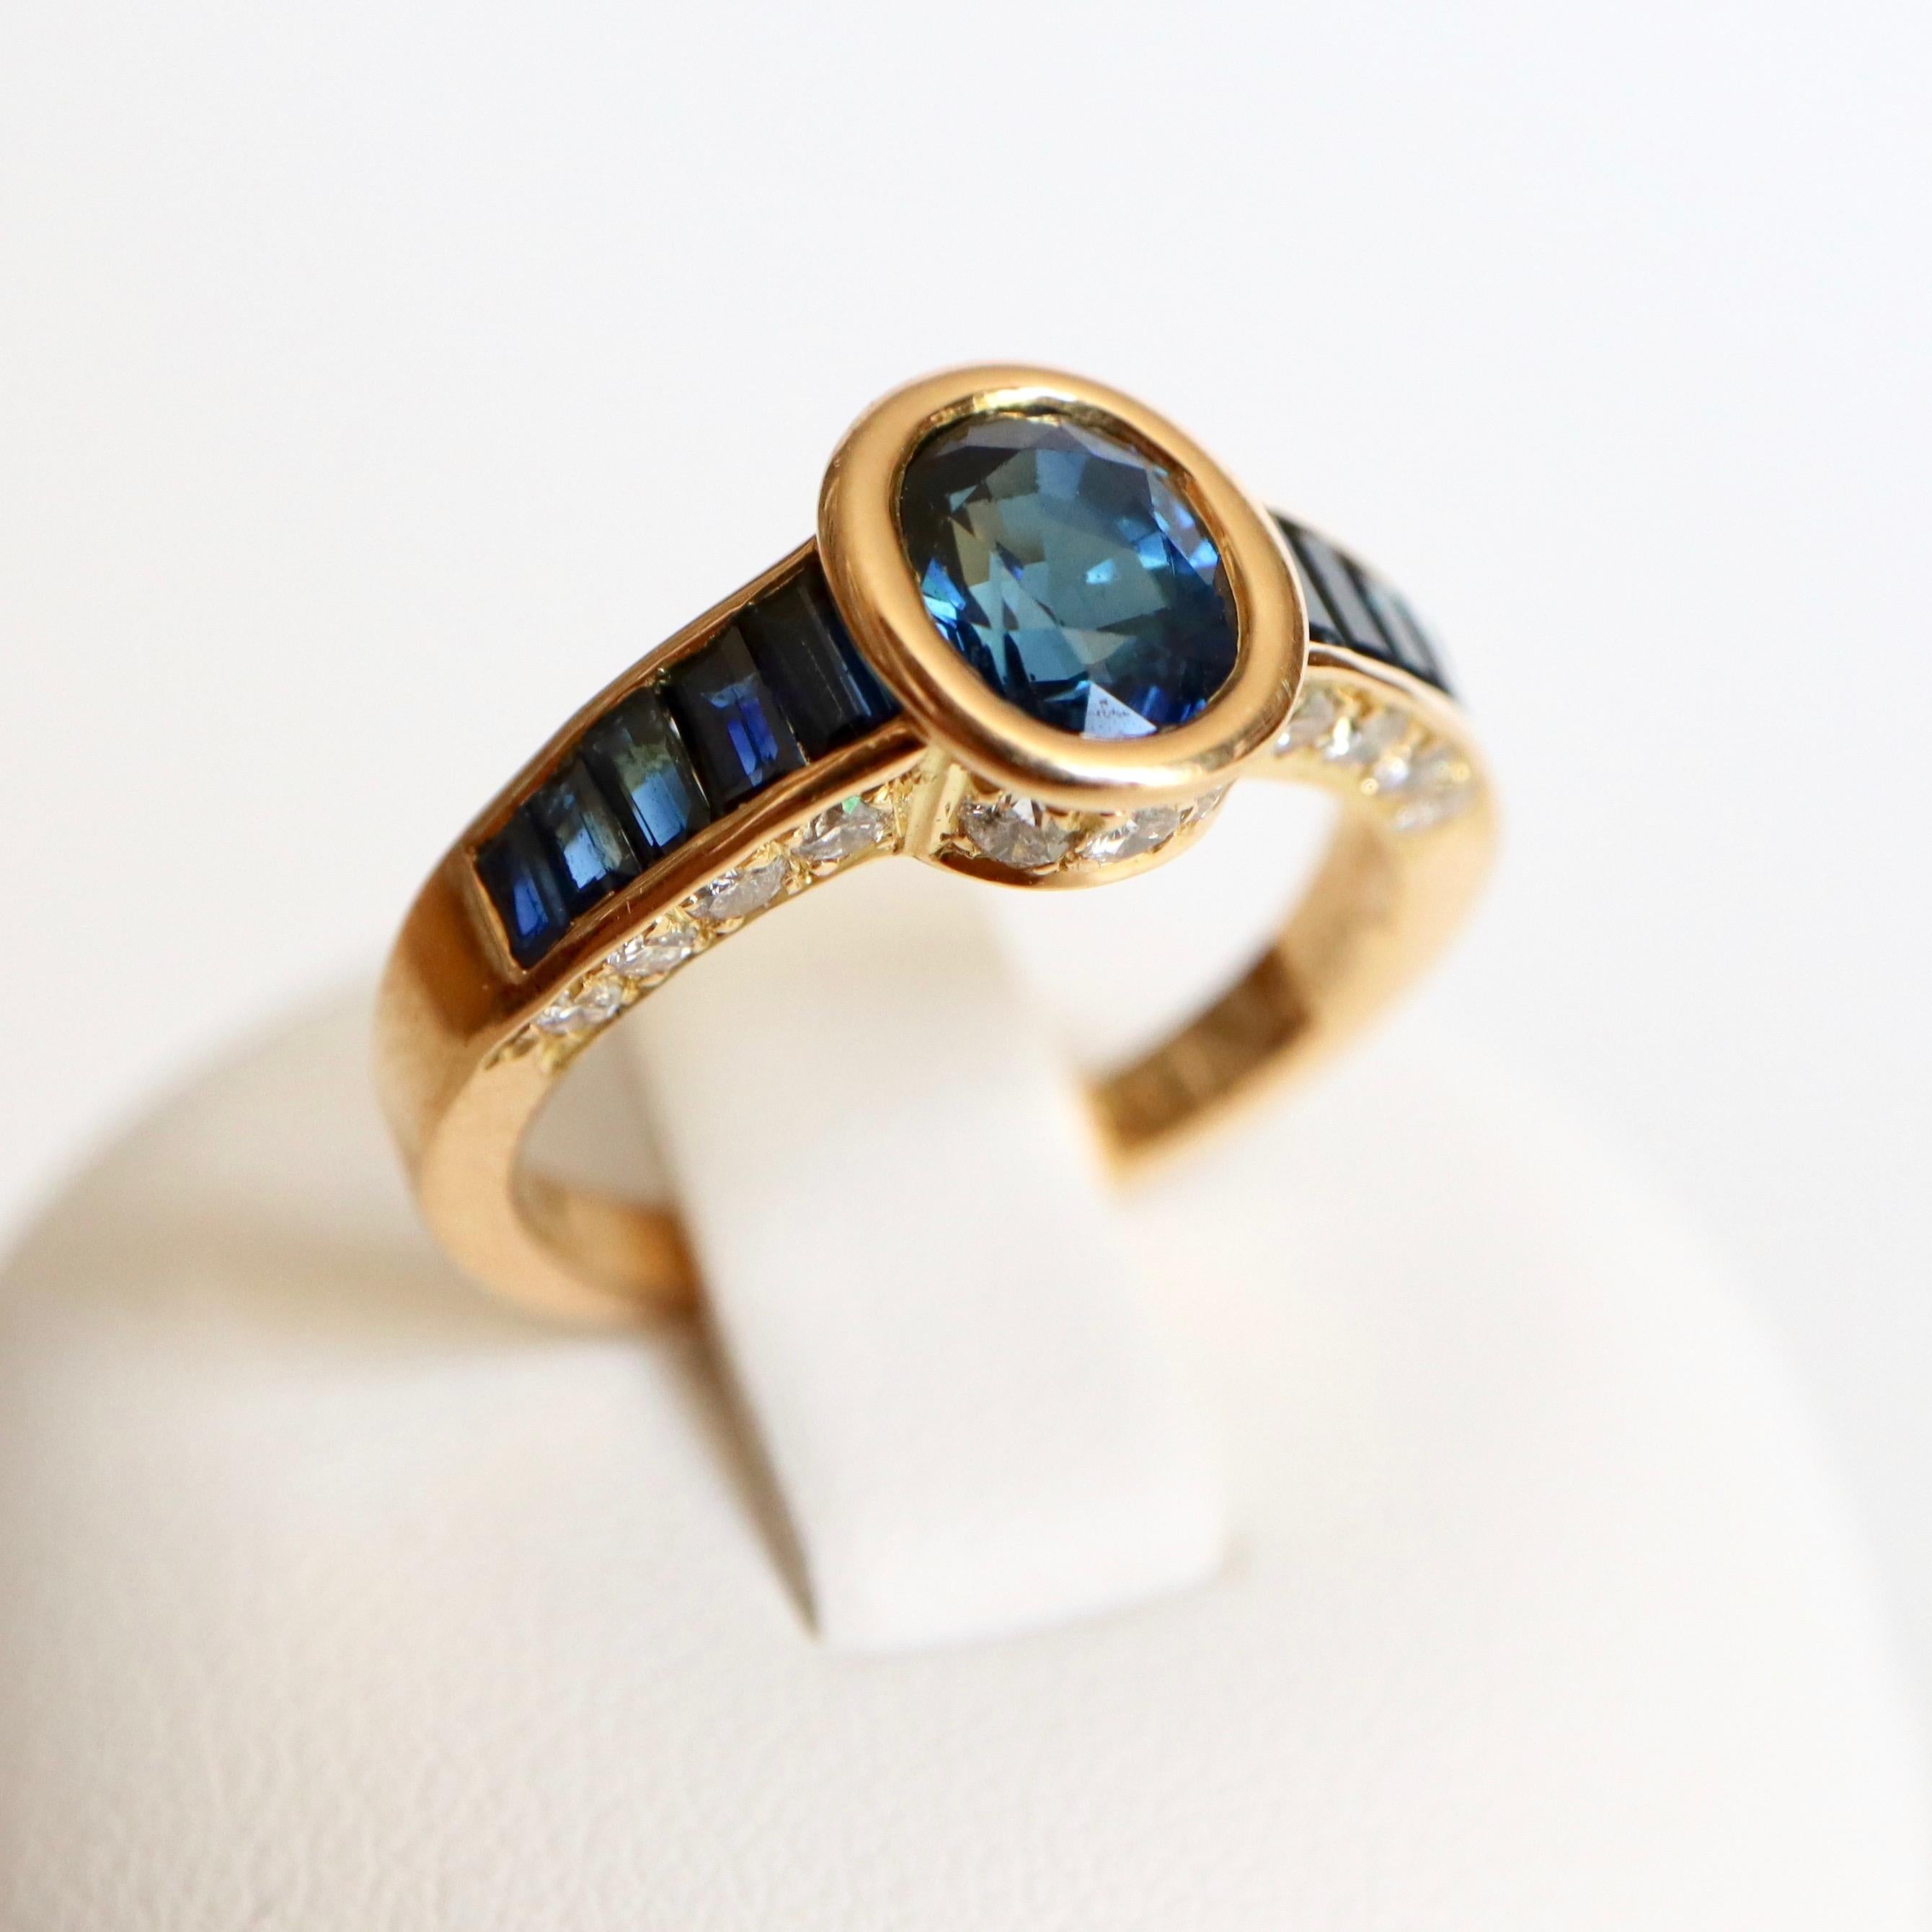 MAUBOUSSIN Ring in 18K yellow Gold Sapphires and Diamonds. Ring retaining a Closed Sapphire set with 5 calibrated Sapphires on both Sides. The Body of the Ring is set with 11 Diamonds on each Profile.
Signed MAUBOUSSIN and numbered. French